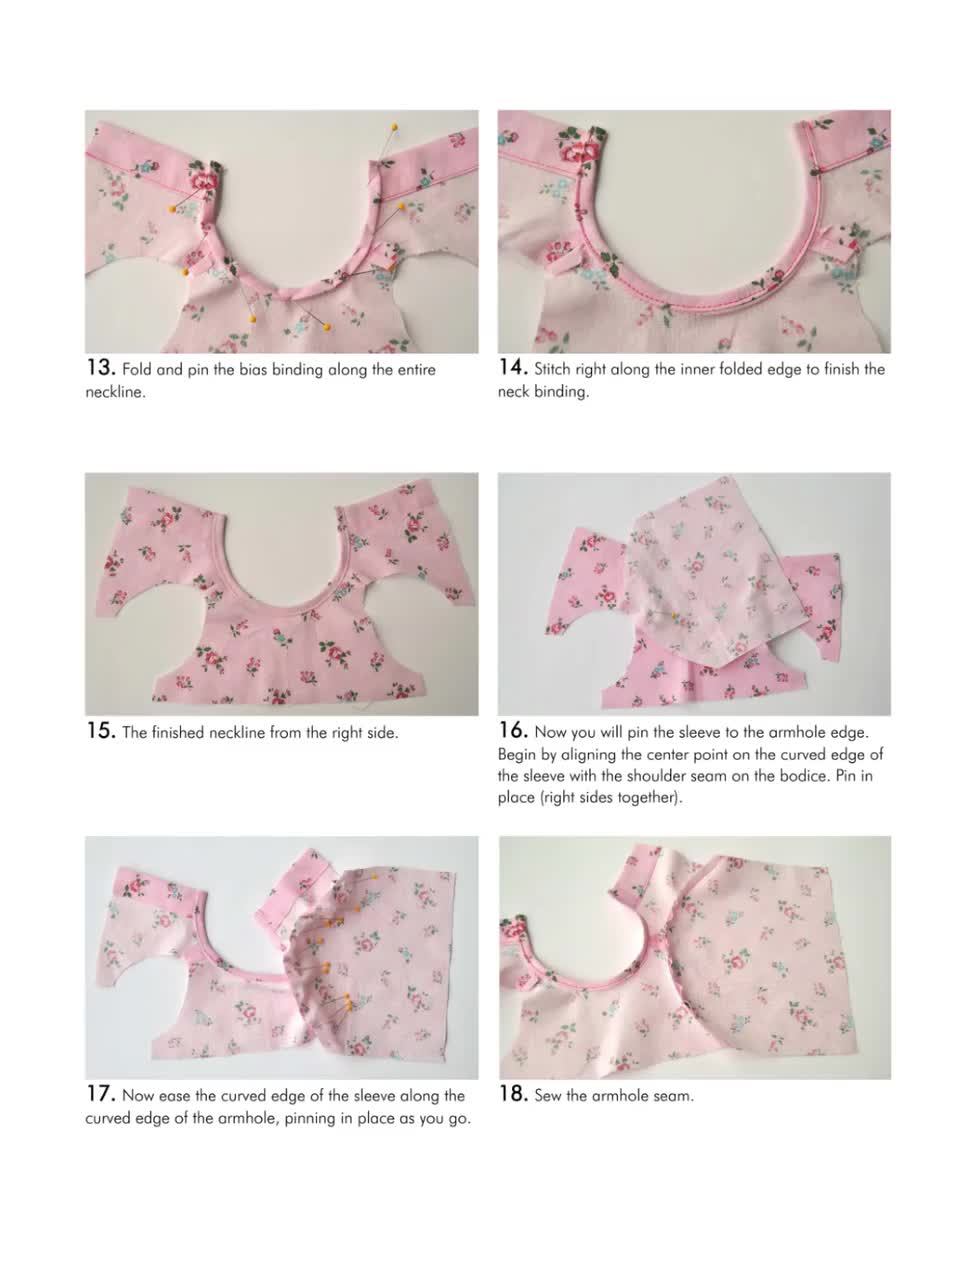 20+ Free Printable Clothes Patterns to Sew for 11.5 Dolls Like